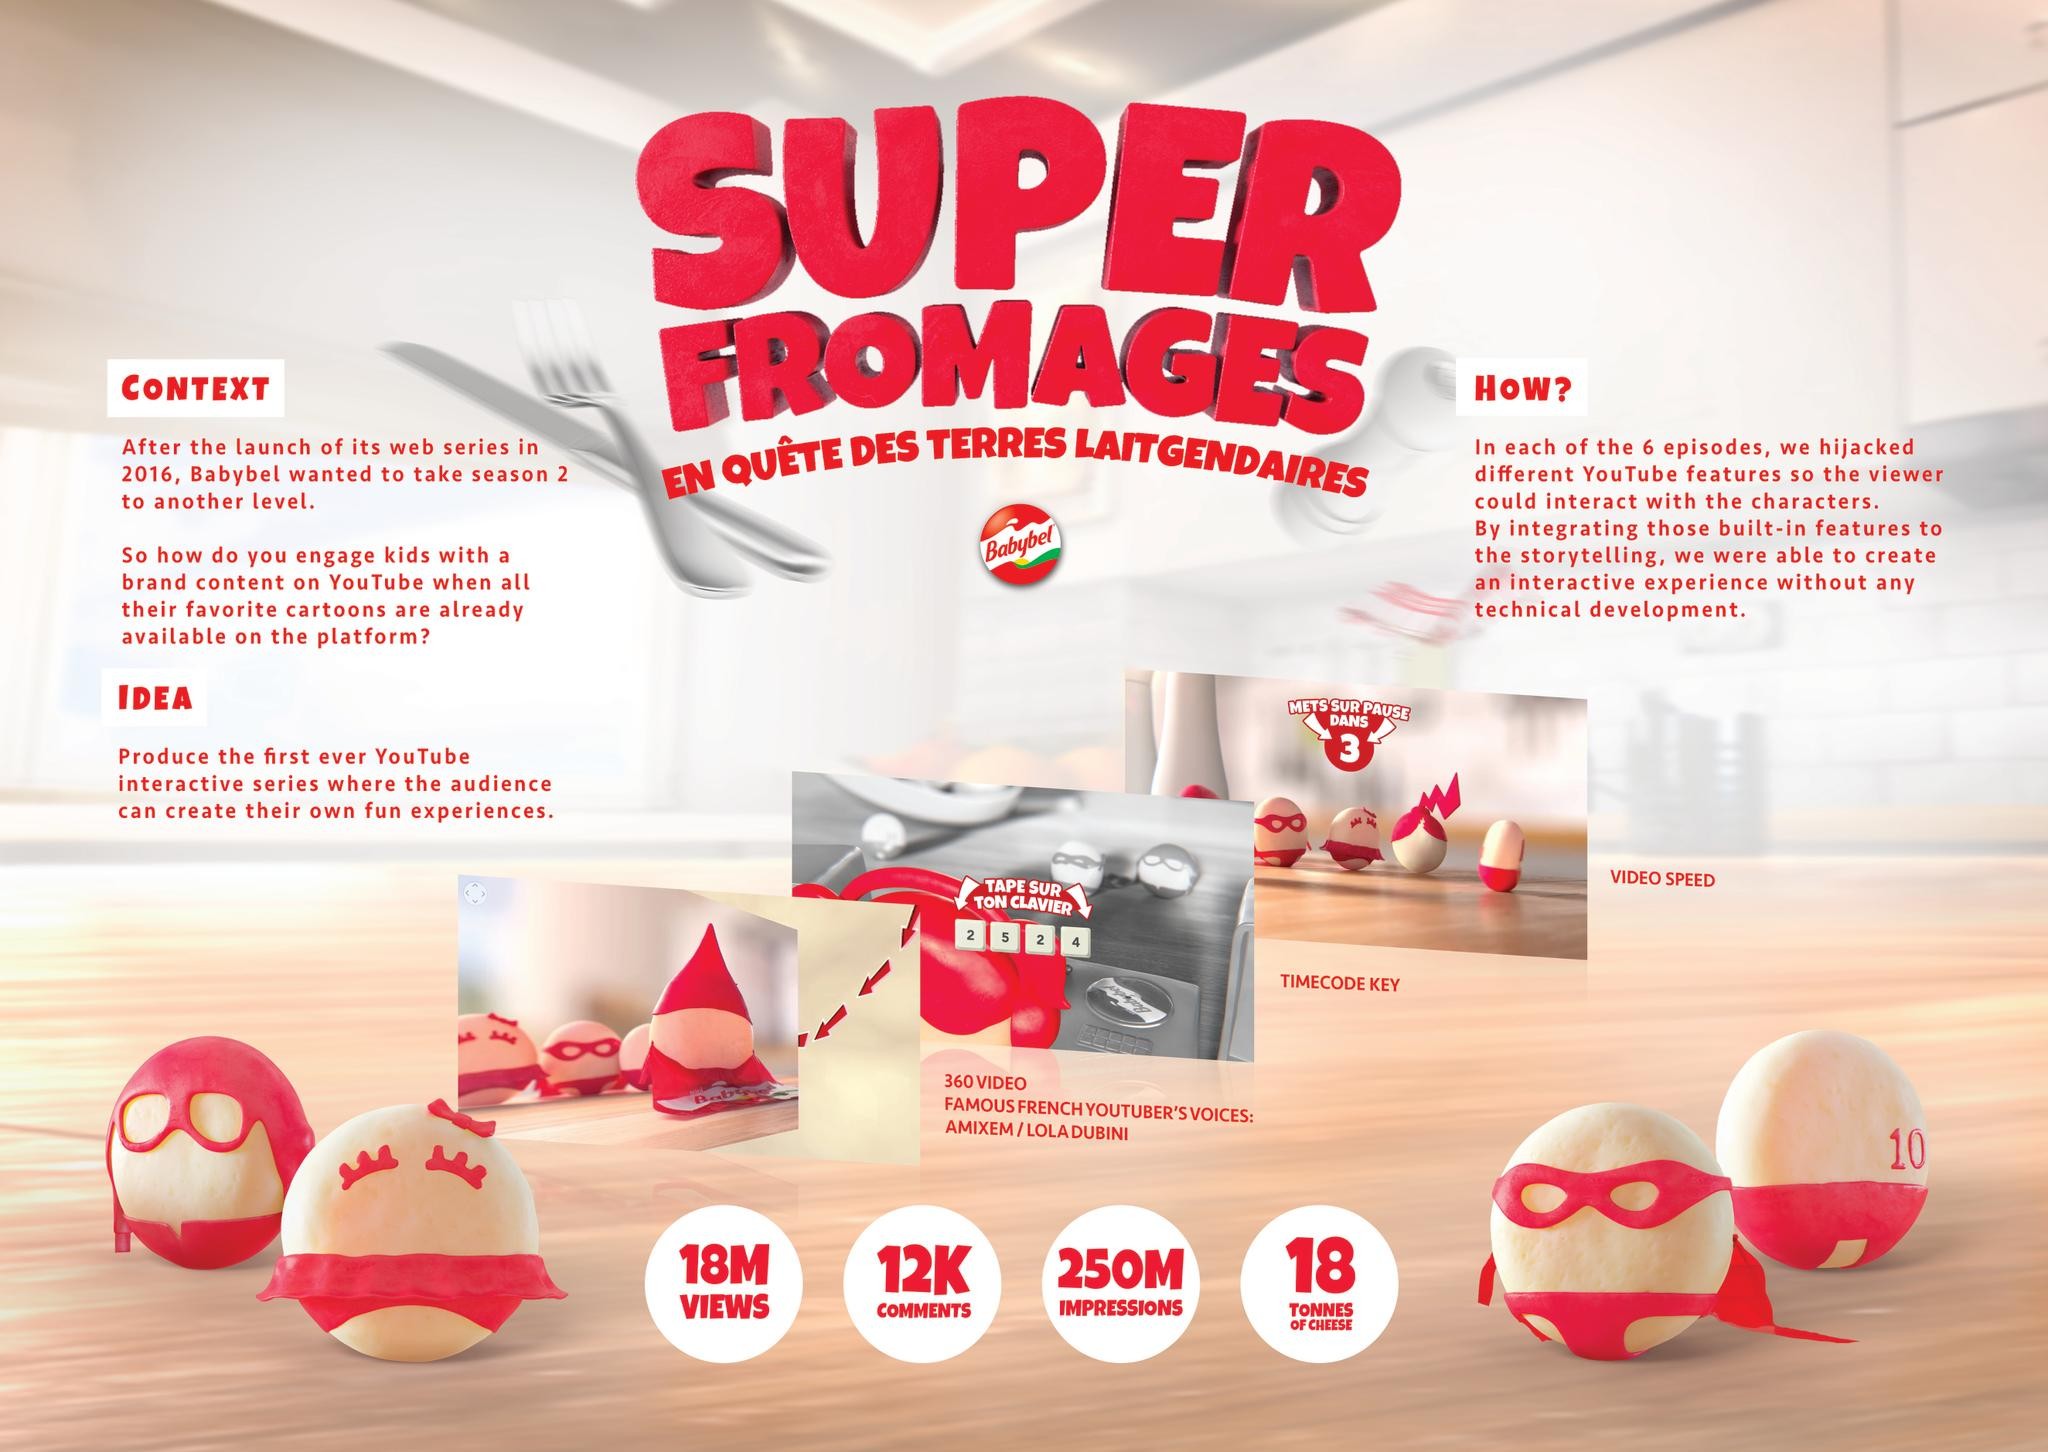 Les Super Fromages (The Super Cheeses)